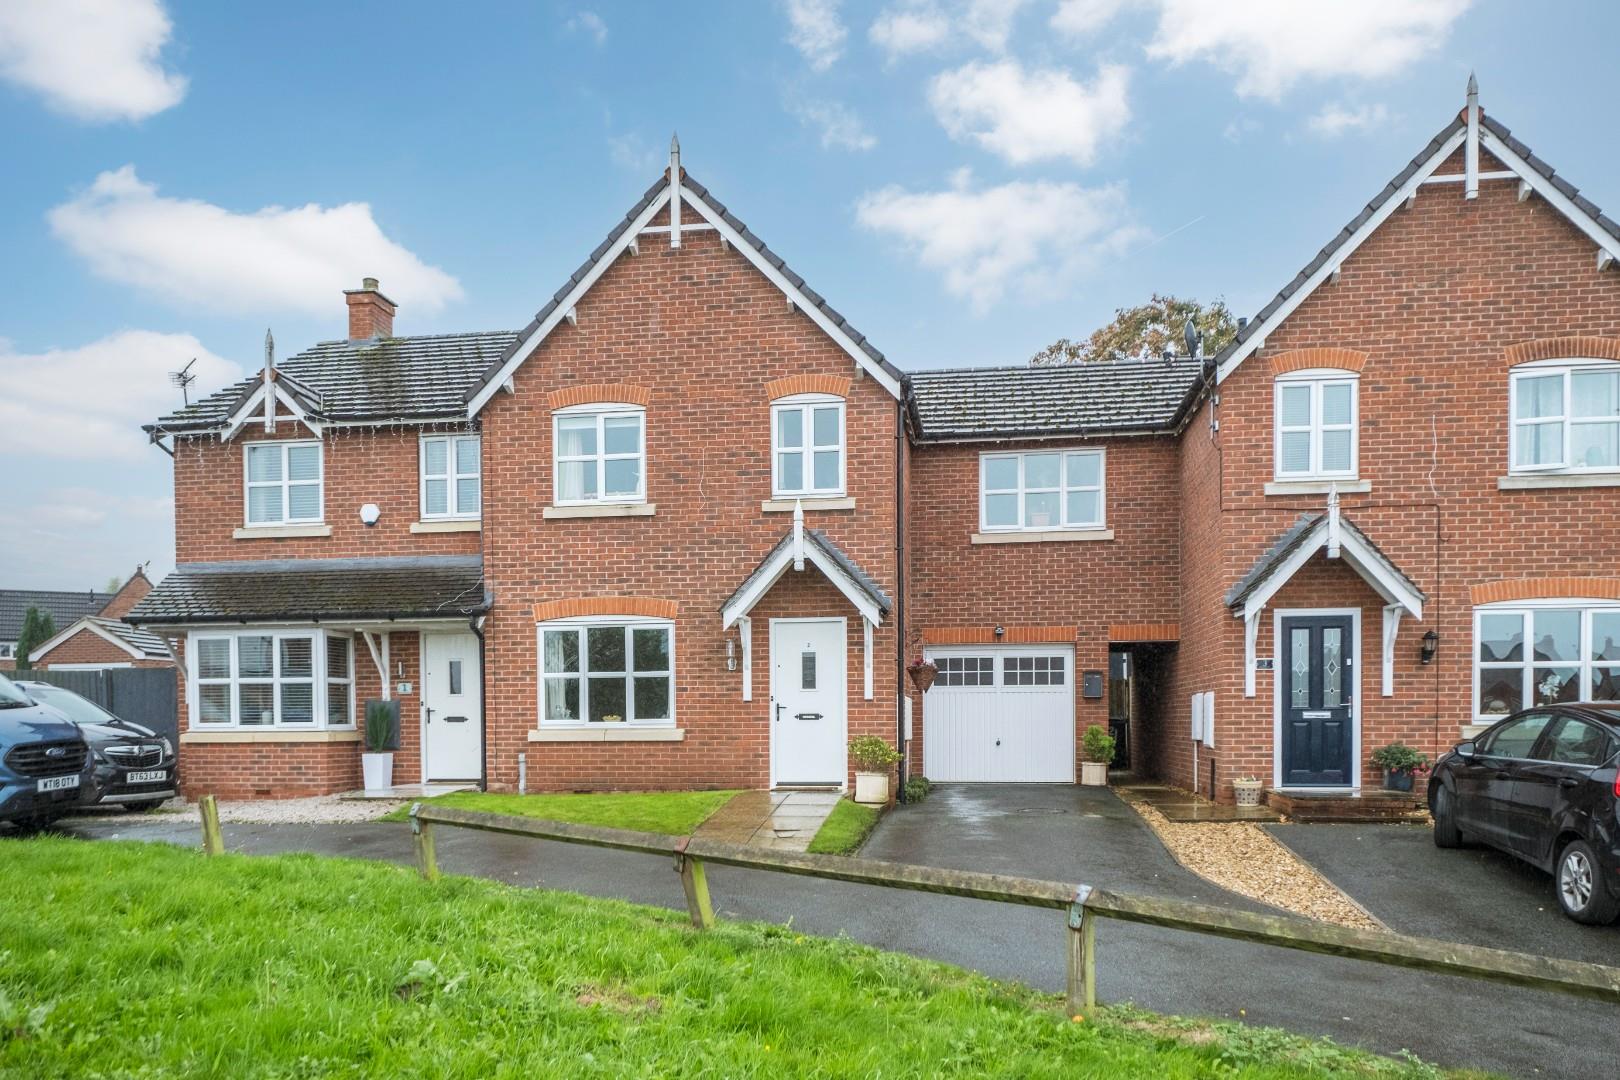 4 bedroom  House for Sale in Winsford